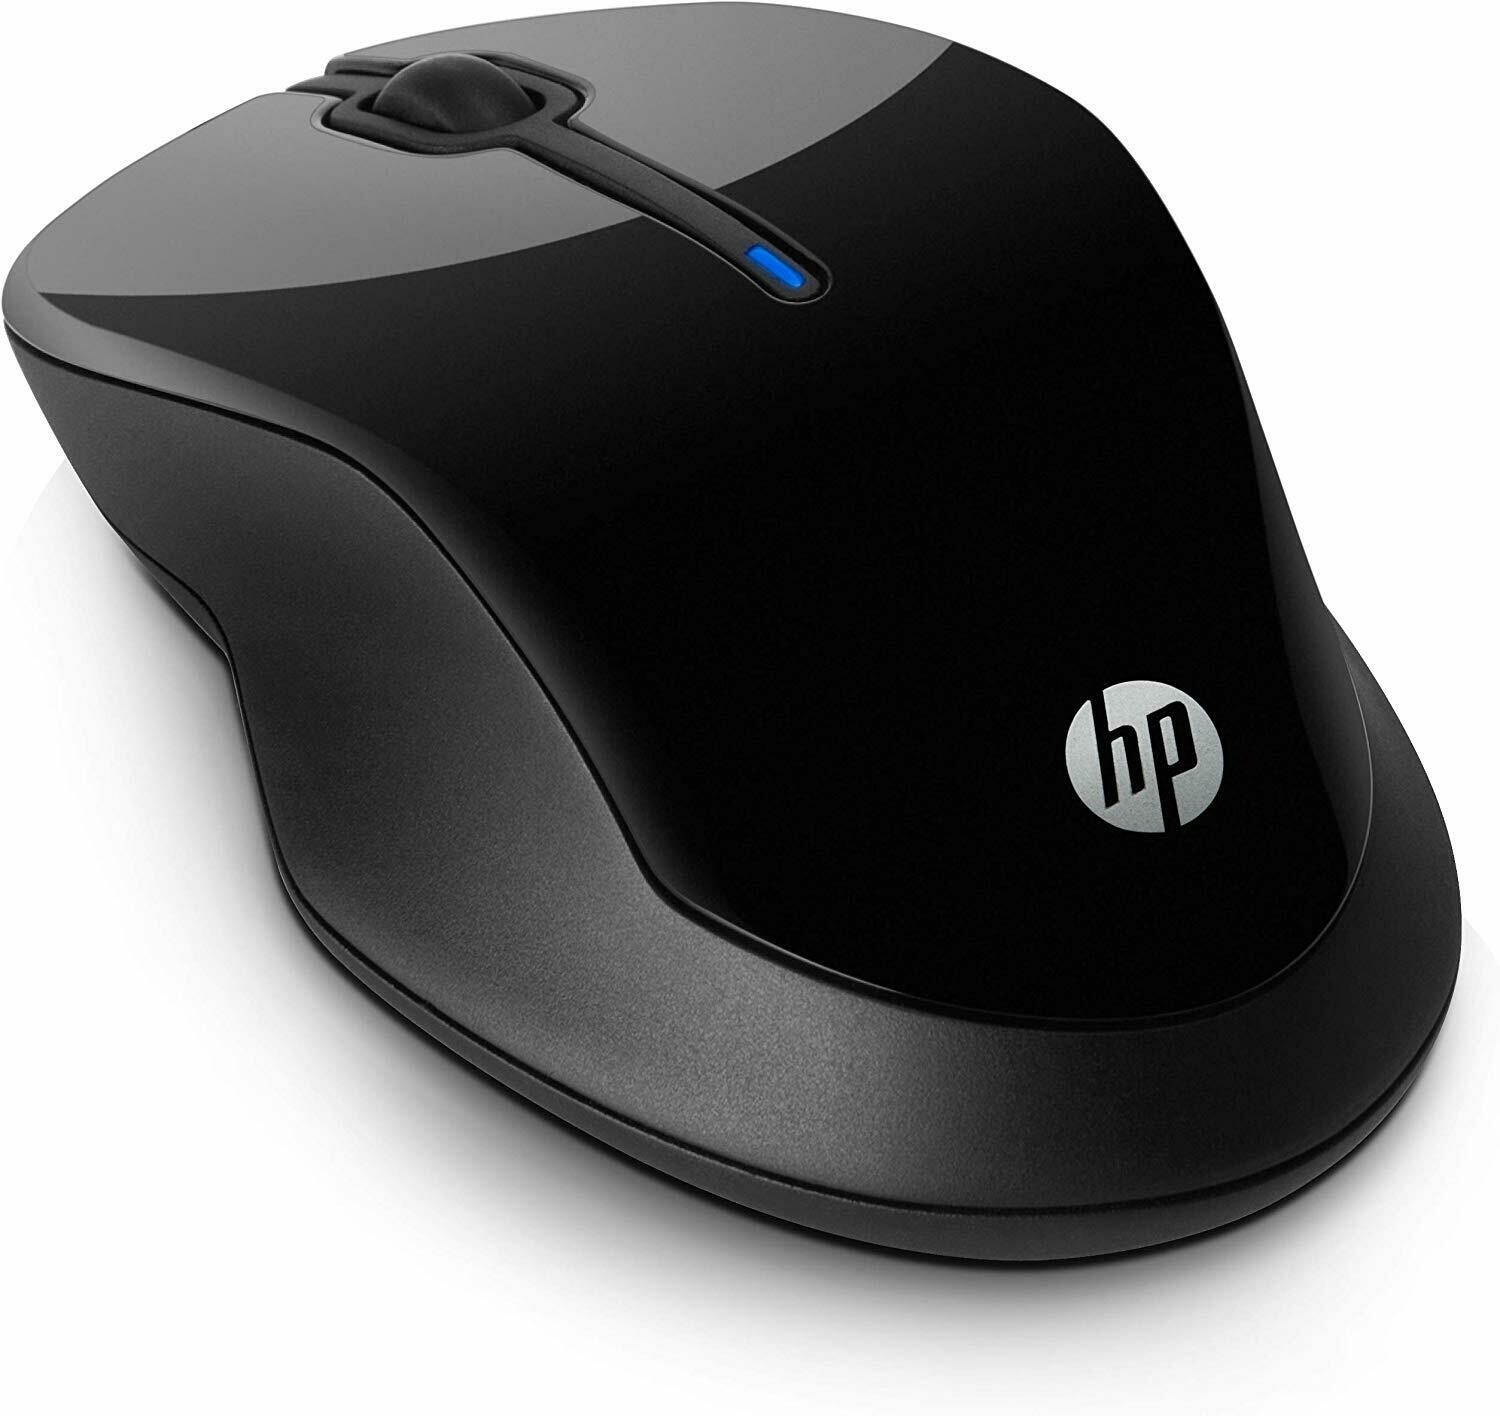 HP 250 USB 2.4GHz Wireless Mouse